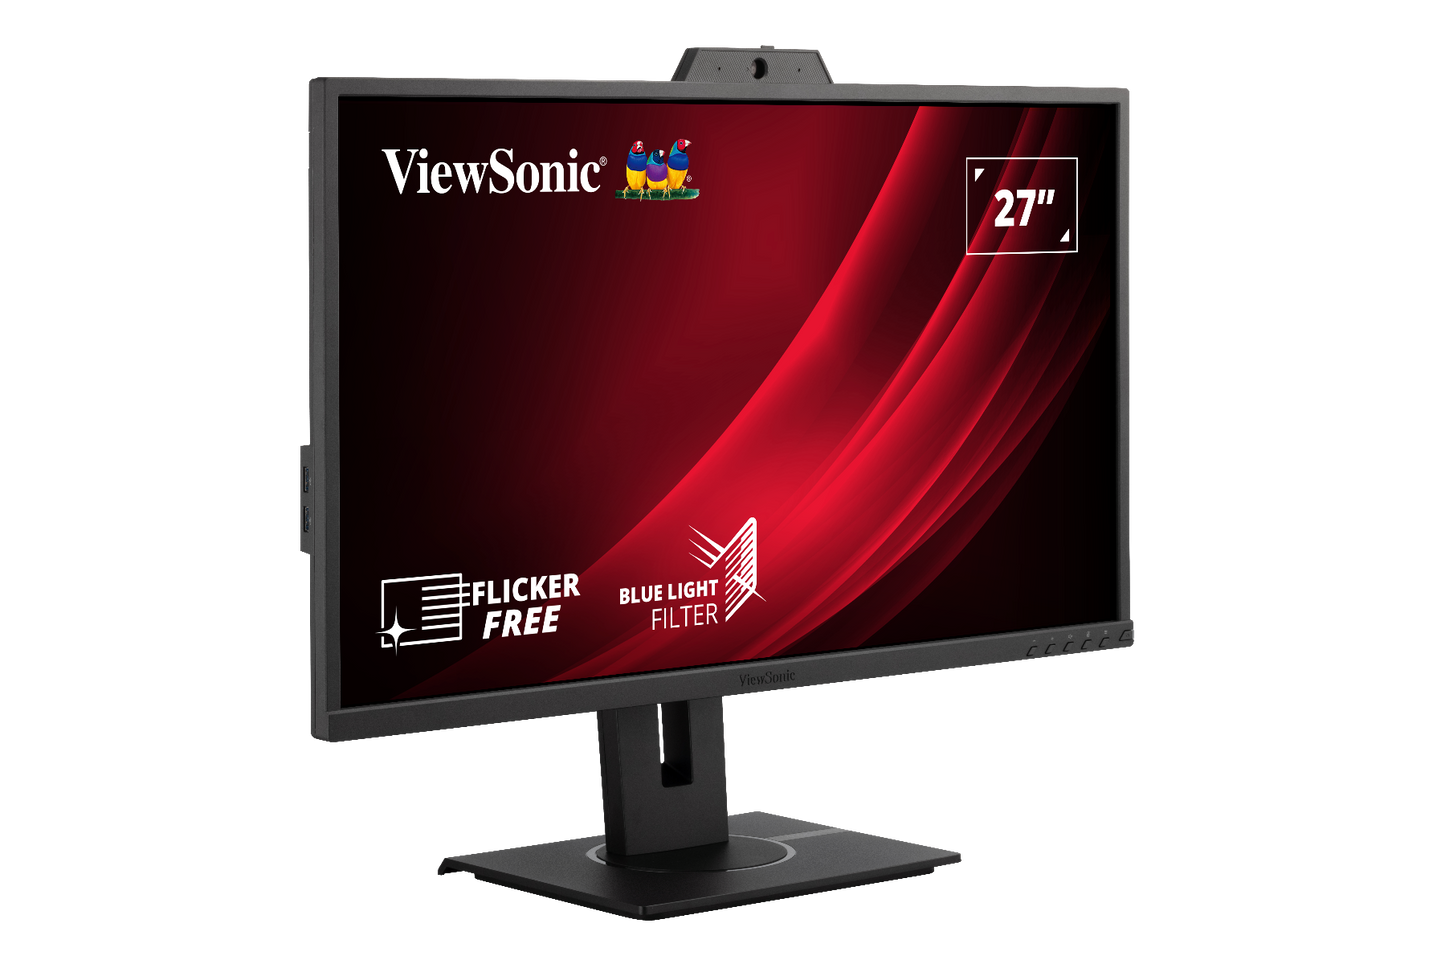 View Sonic - VG2740V - 27” IPS Full HD Video Conferencing Monitor